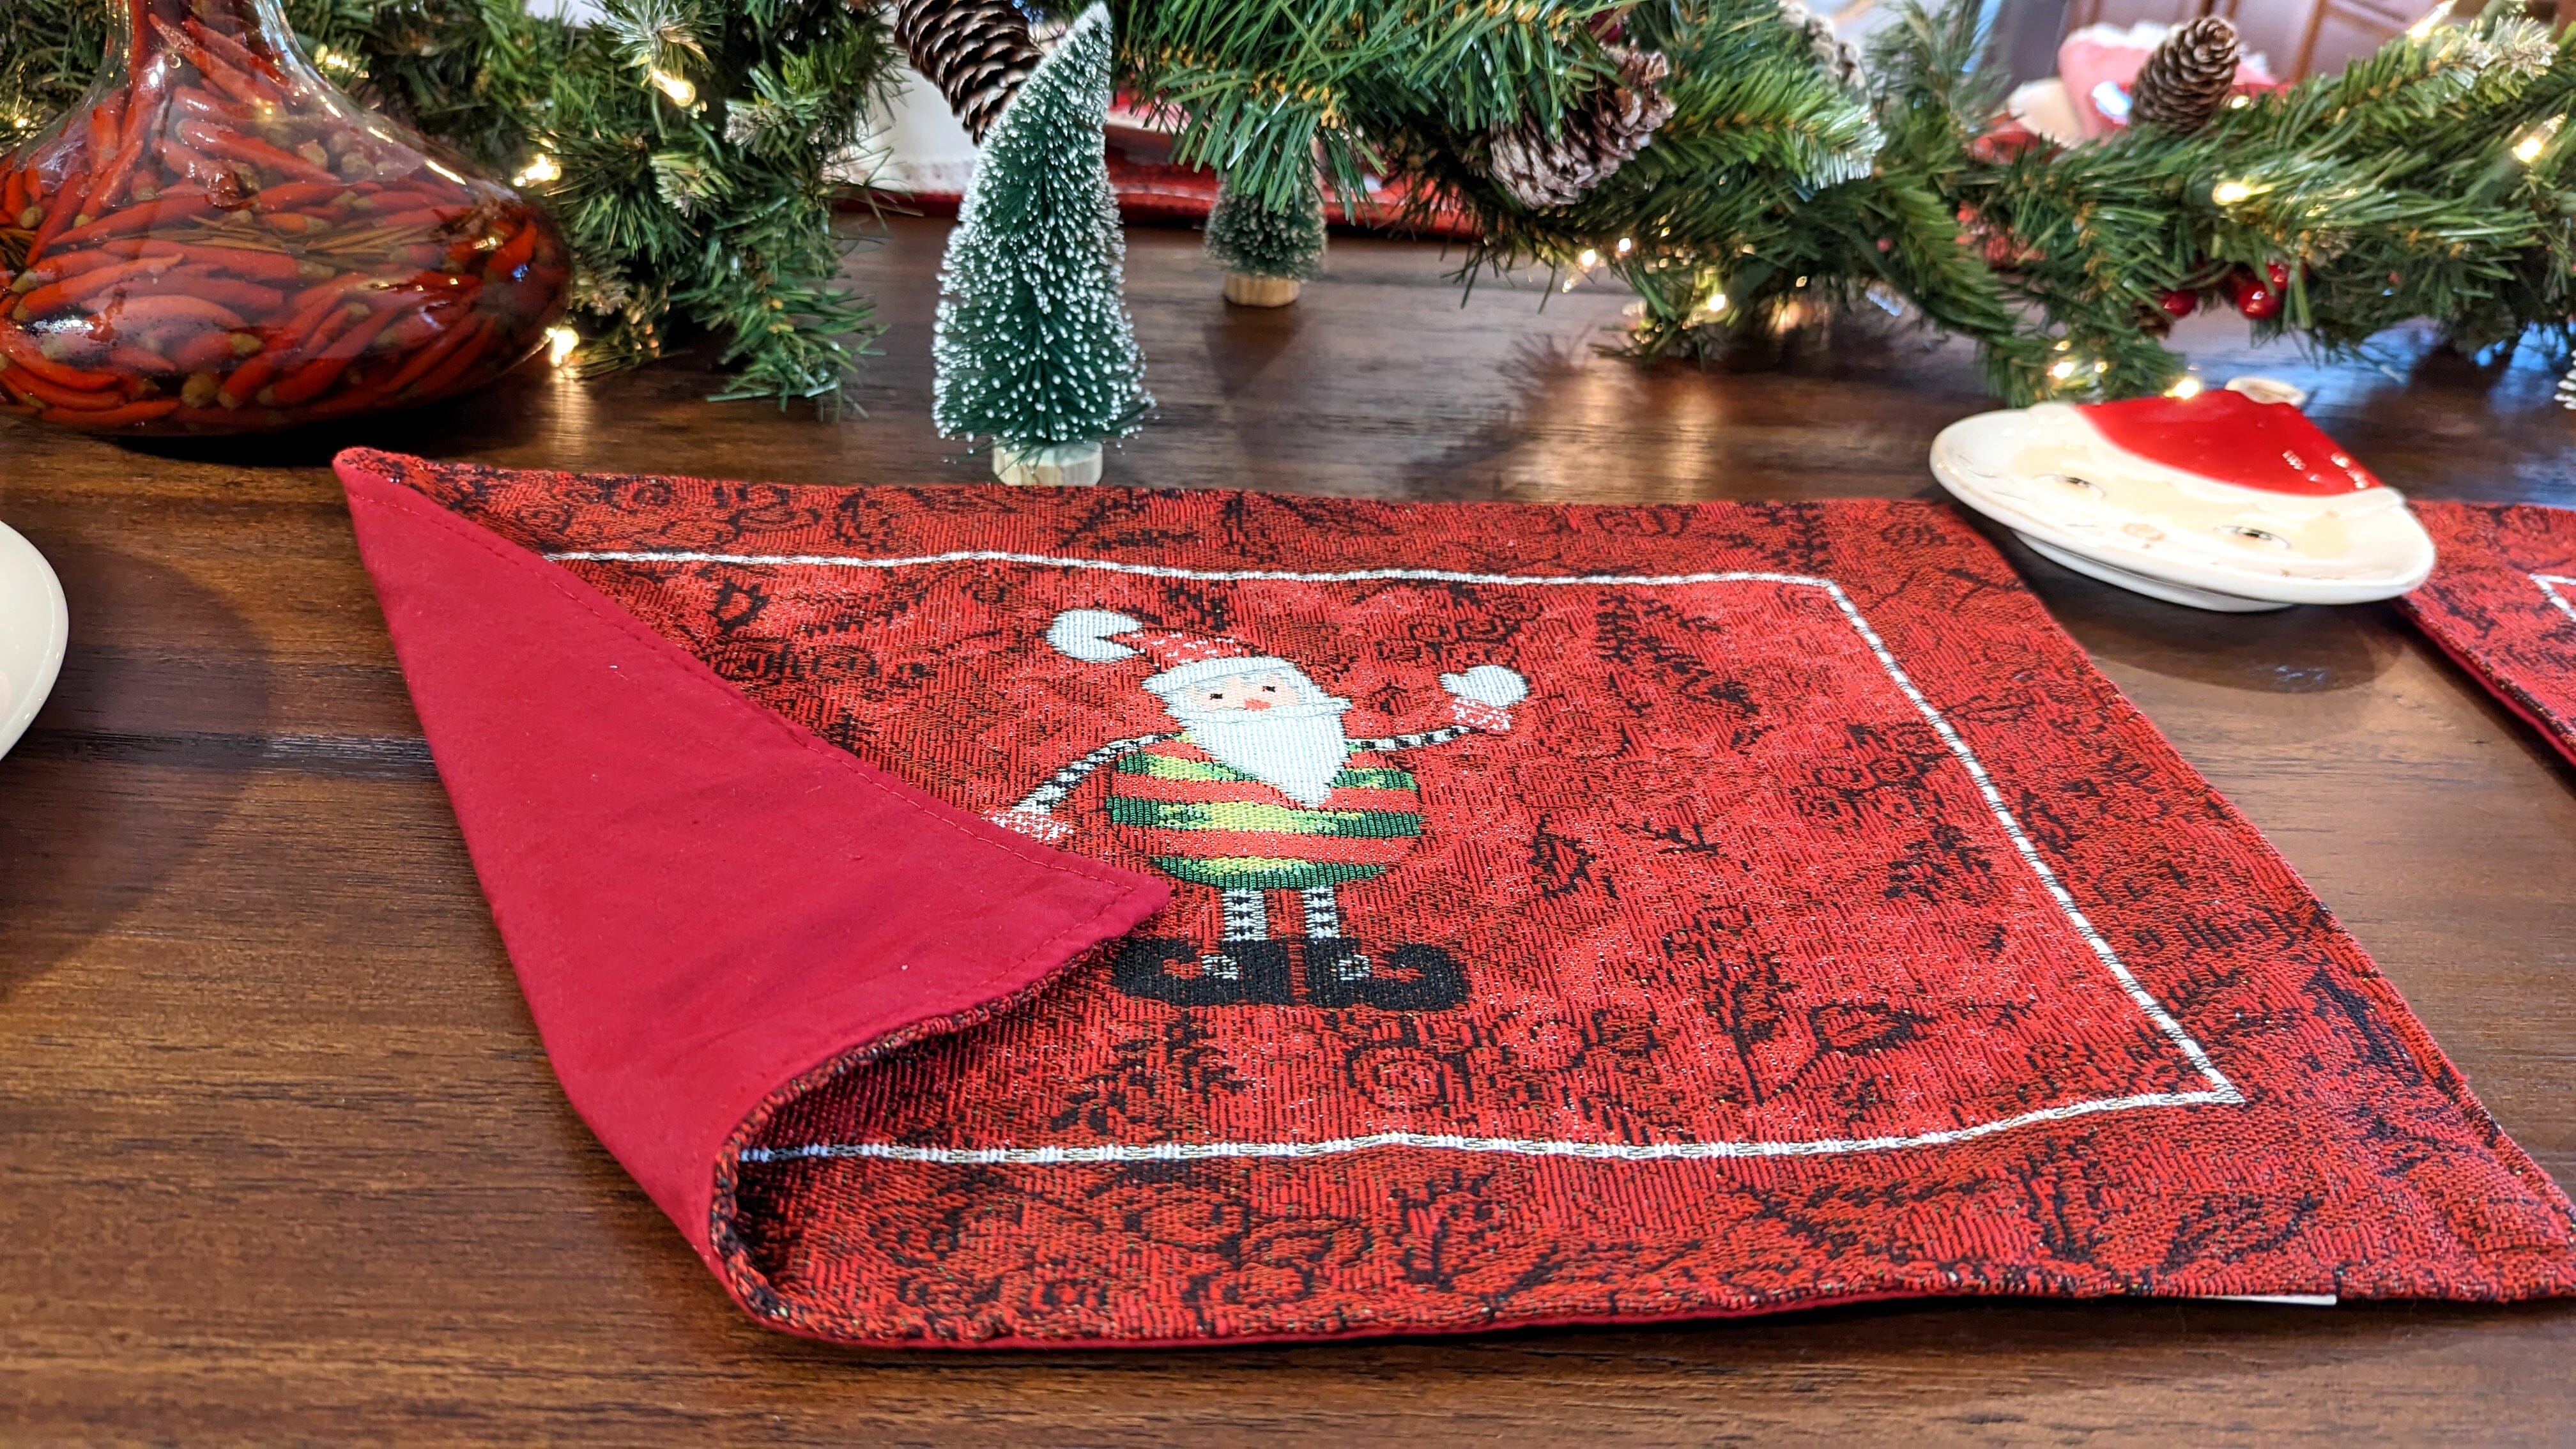 Tache Here Comes Santa Claus Vintage Holiday Woven Tapestry Red Christmas Placemat Set of 4 (8577PM) - Tache Home Fashion